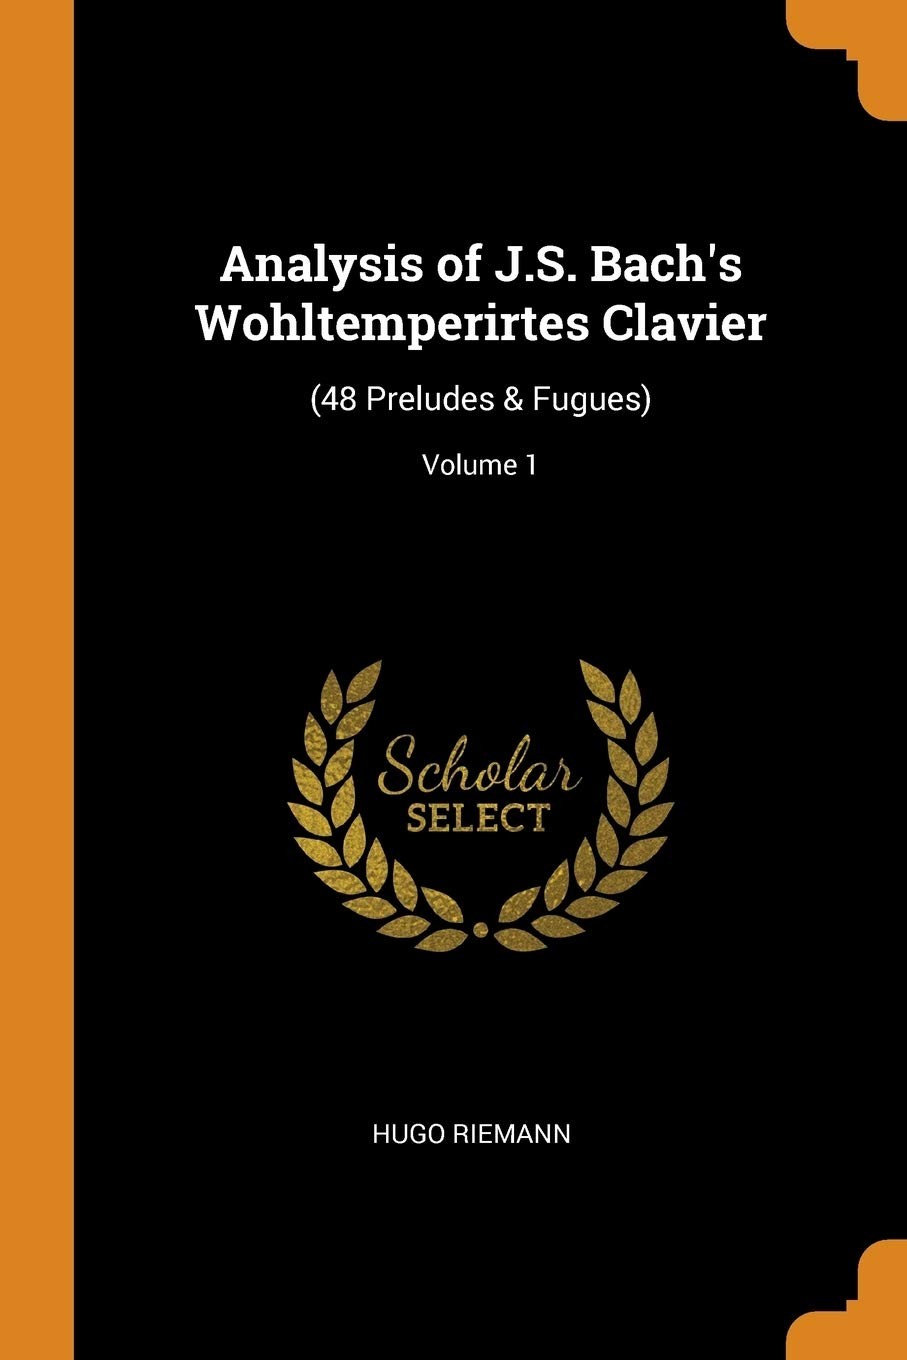 Analysis of J. S. Bach's Wohltemperirtes Clavier: 48 Preludes and Fugues